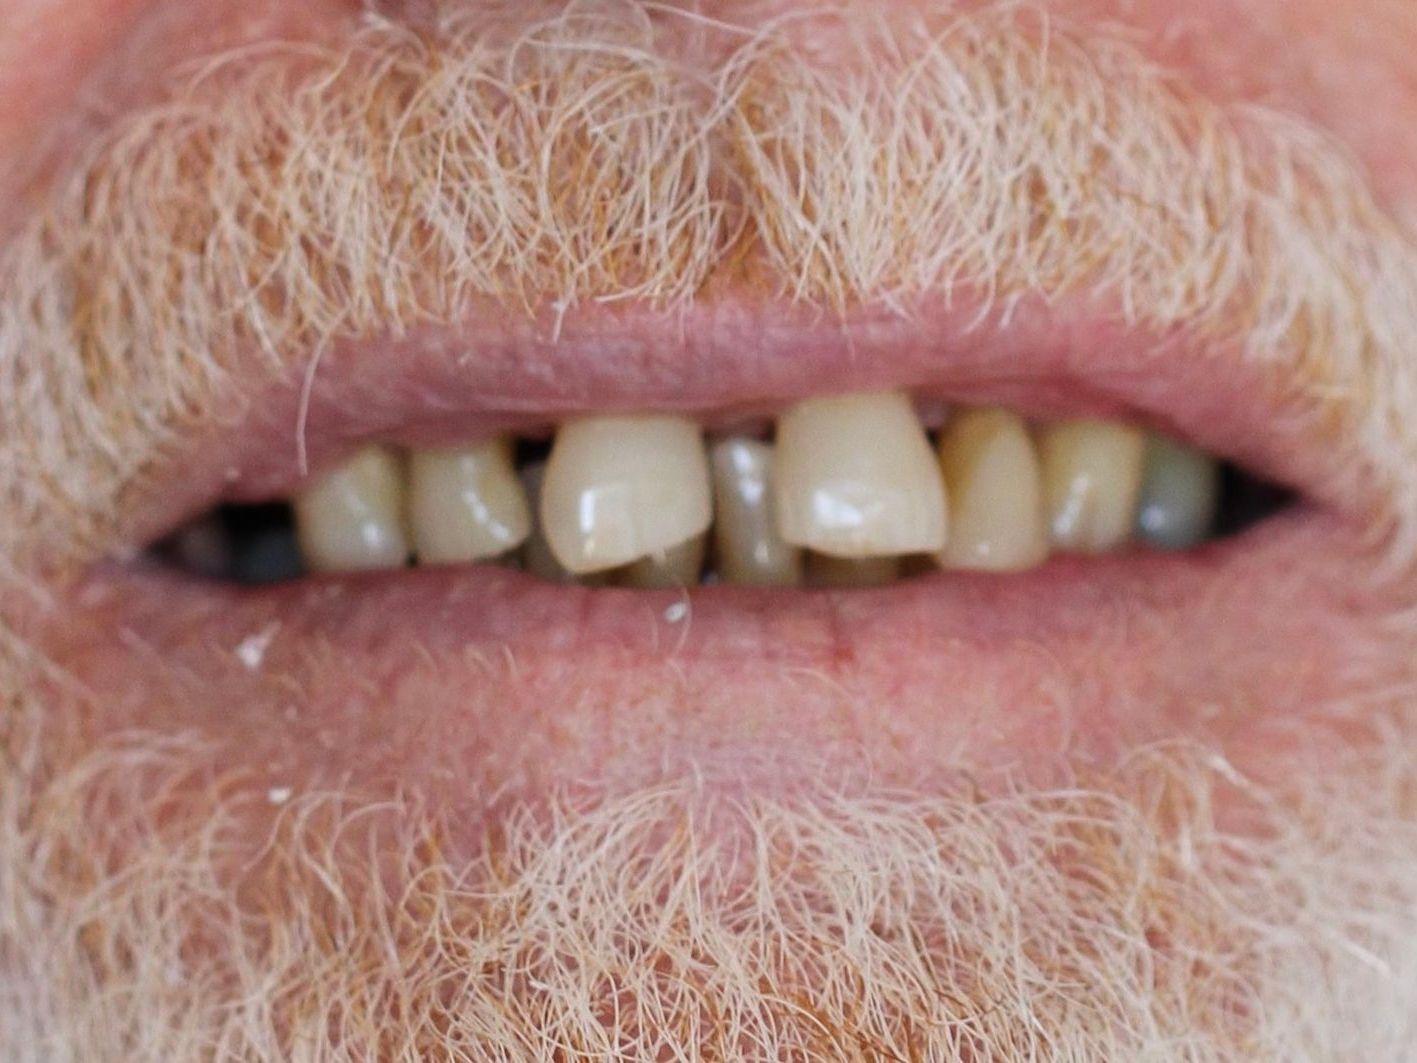 A close up of a man 's mouth with a beard and missing teeth.